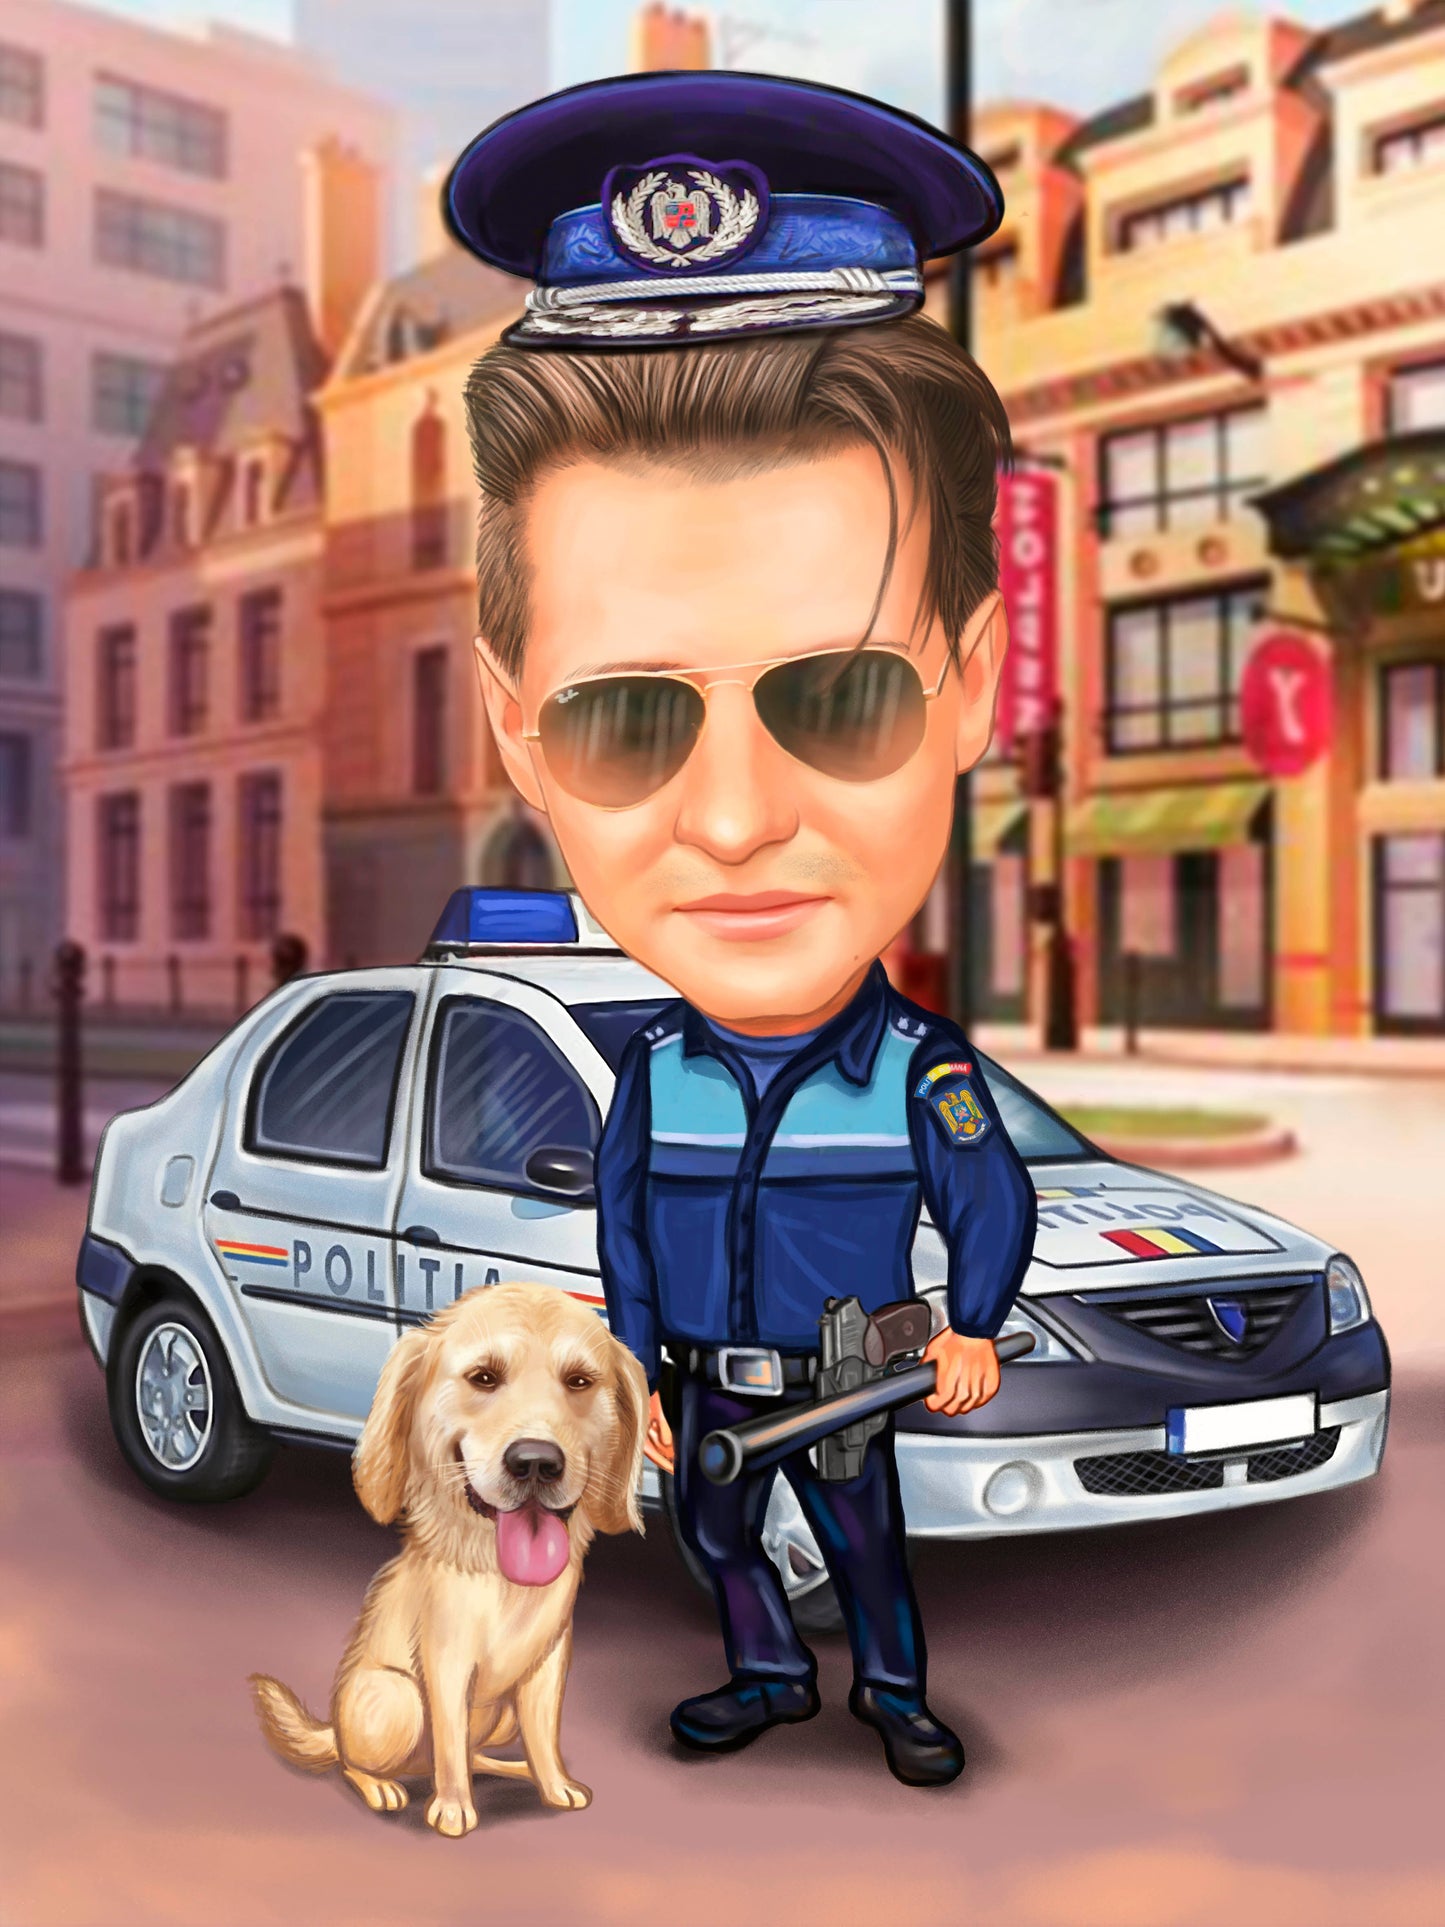 Policeman with a dog caricature